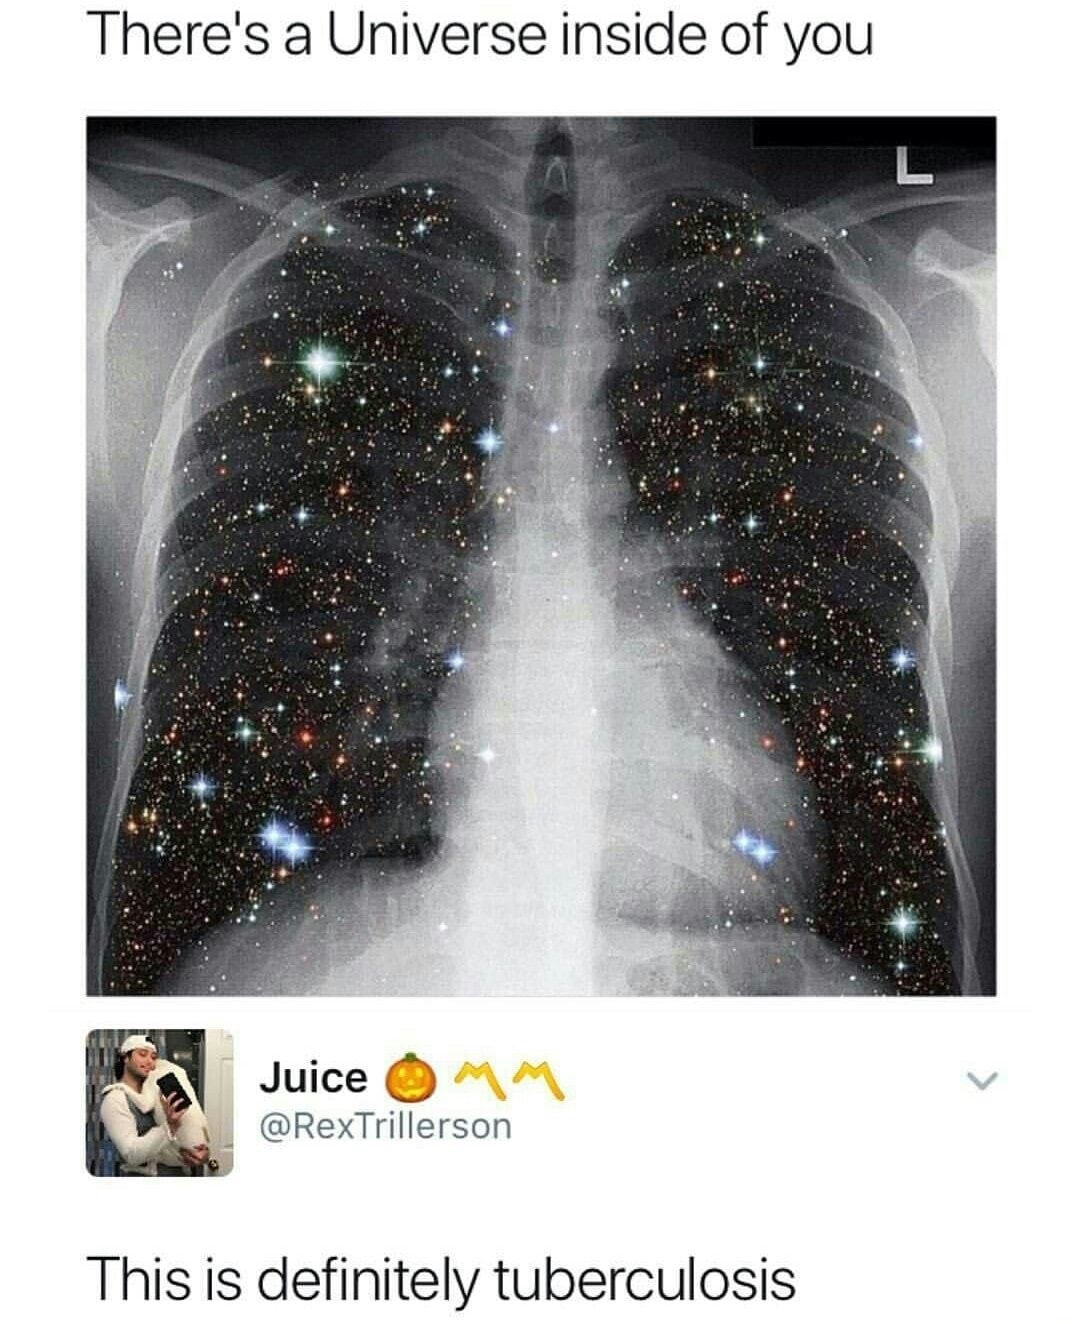 memes - there's a universe inside of you - There's a Universe inside of you Juice 0 Mm This is definitely tuberculosis